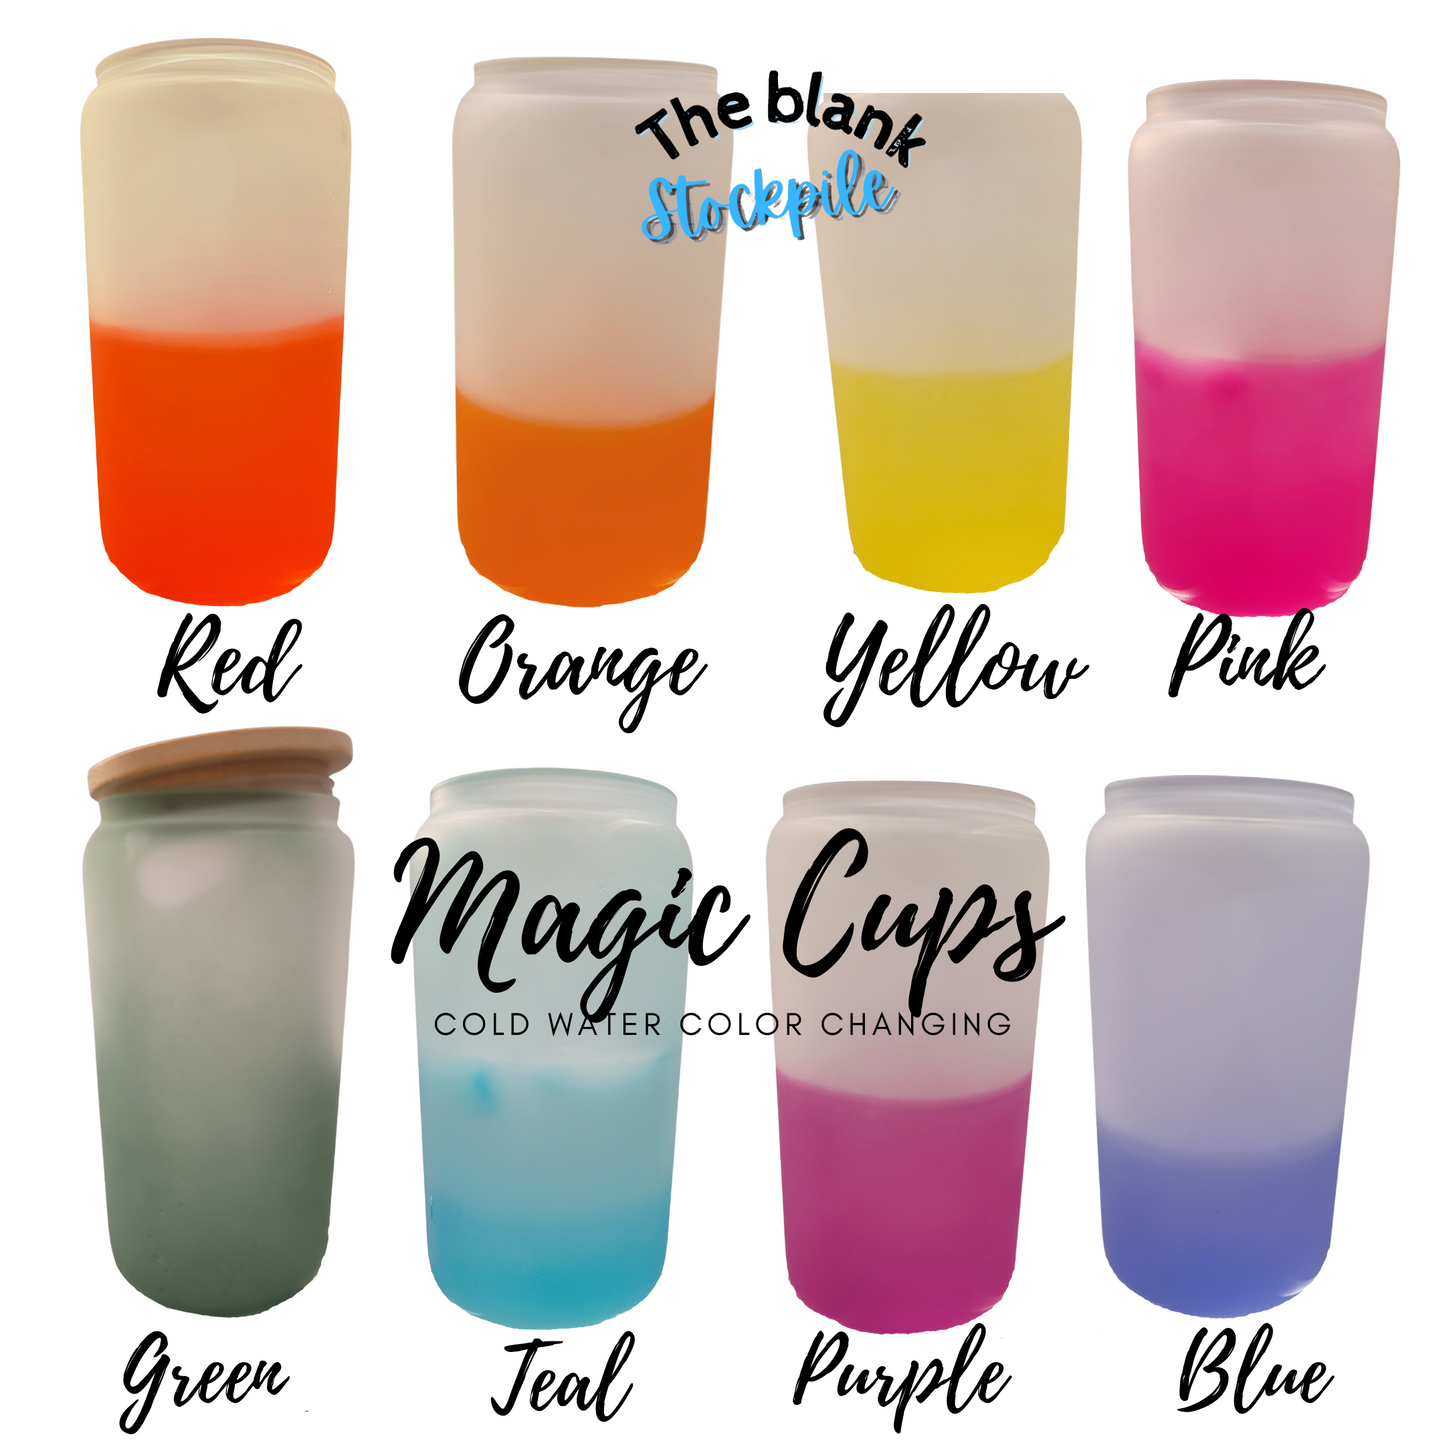 You are Magic Glass Can 16oz with Bamboo Lid and Glass Straw